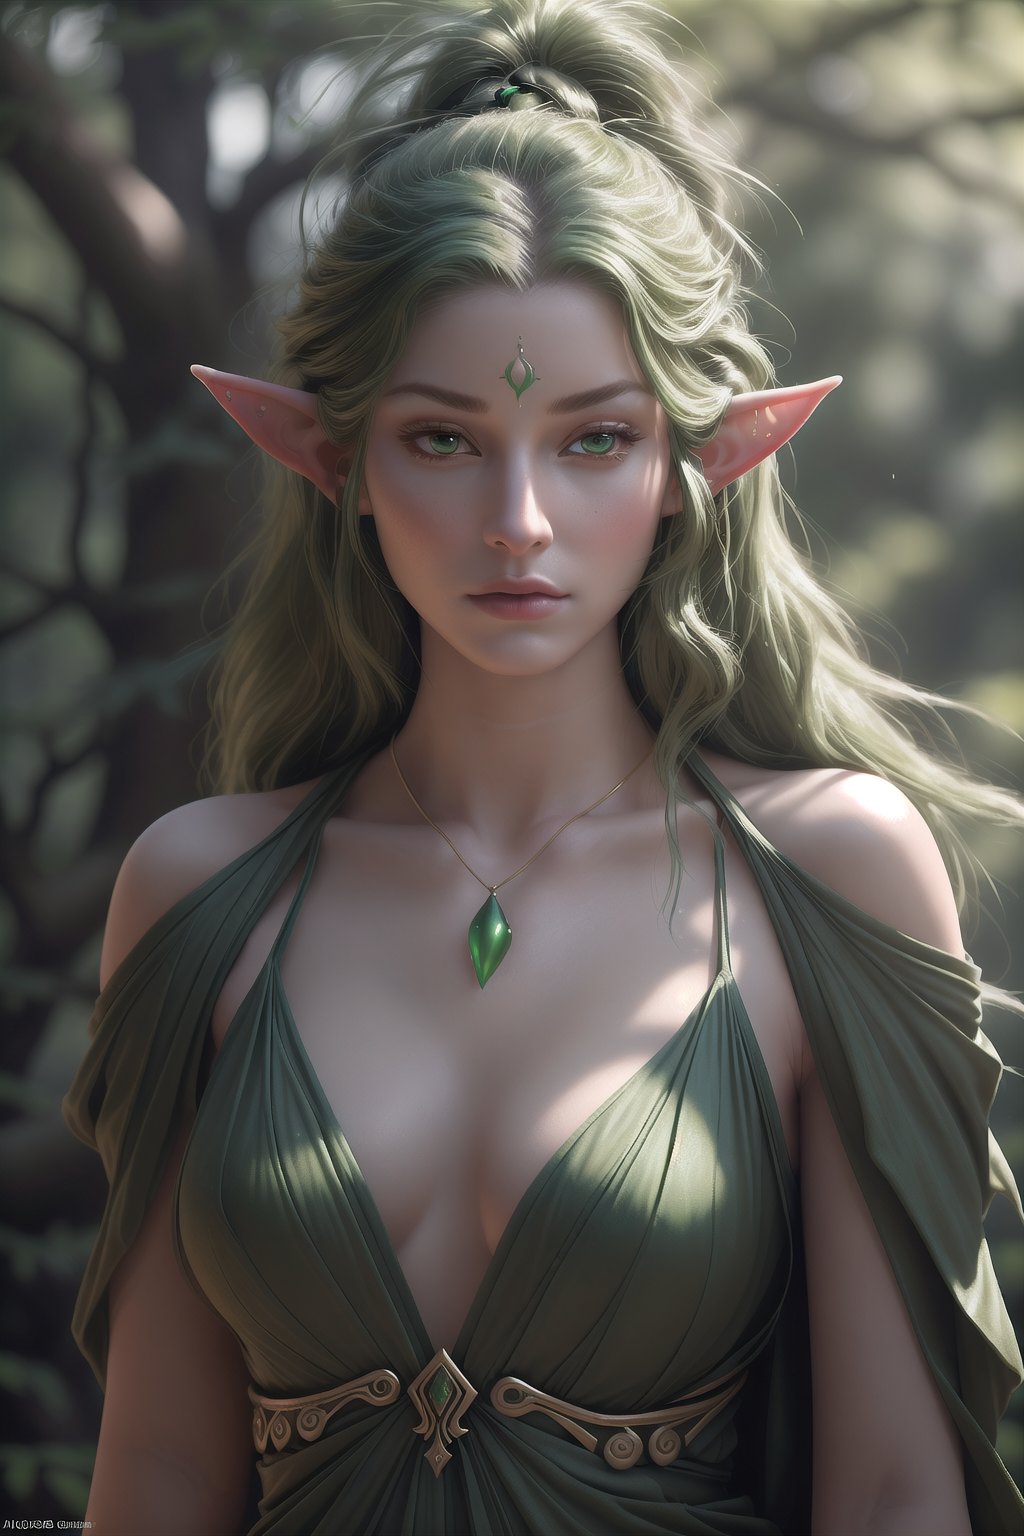 beautiful warrior in the forest, modelling, pose, mature elf, aesthetics of the female body, posing, photorealism, aesthetically pleasing, beautiful, realistic, high resolution, high detail, lush green trees in the forest, expressive look, jewelry

